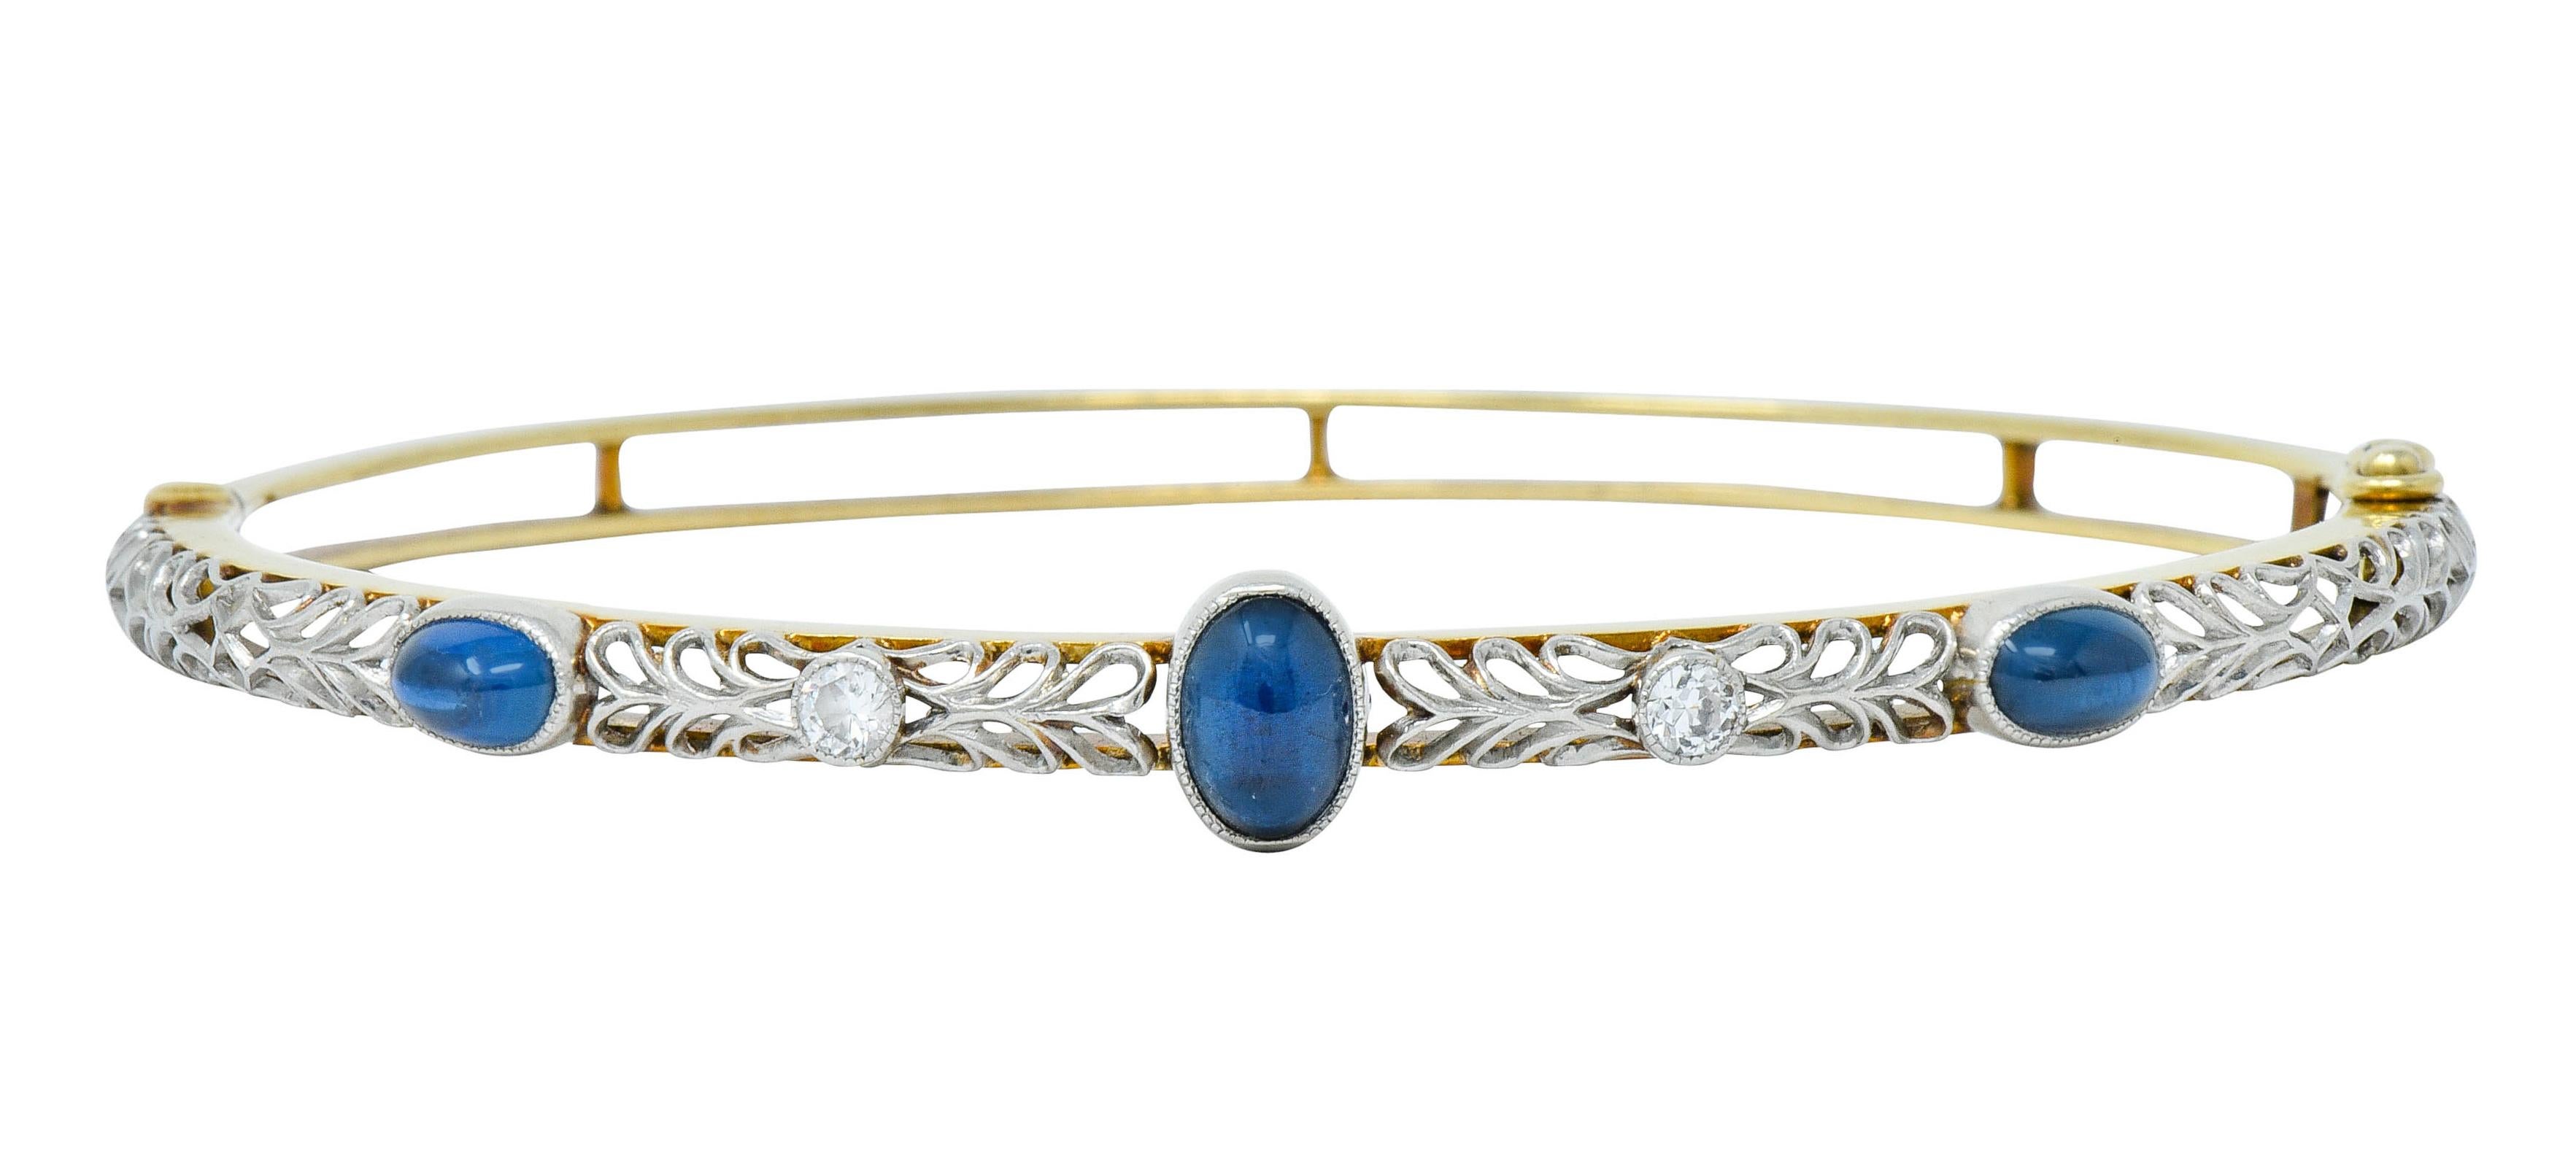 Hinged bangle bracelet with an intricately pierced platinum top featuring bezel set sapphire cabochon and transitional cut diamonds

Sapphires are oval in shape, a well-matched denim blue color, and weigh approximately 1.90 carats